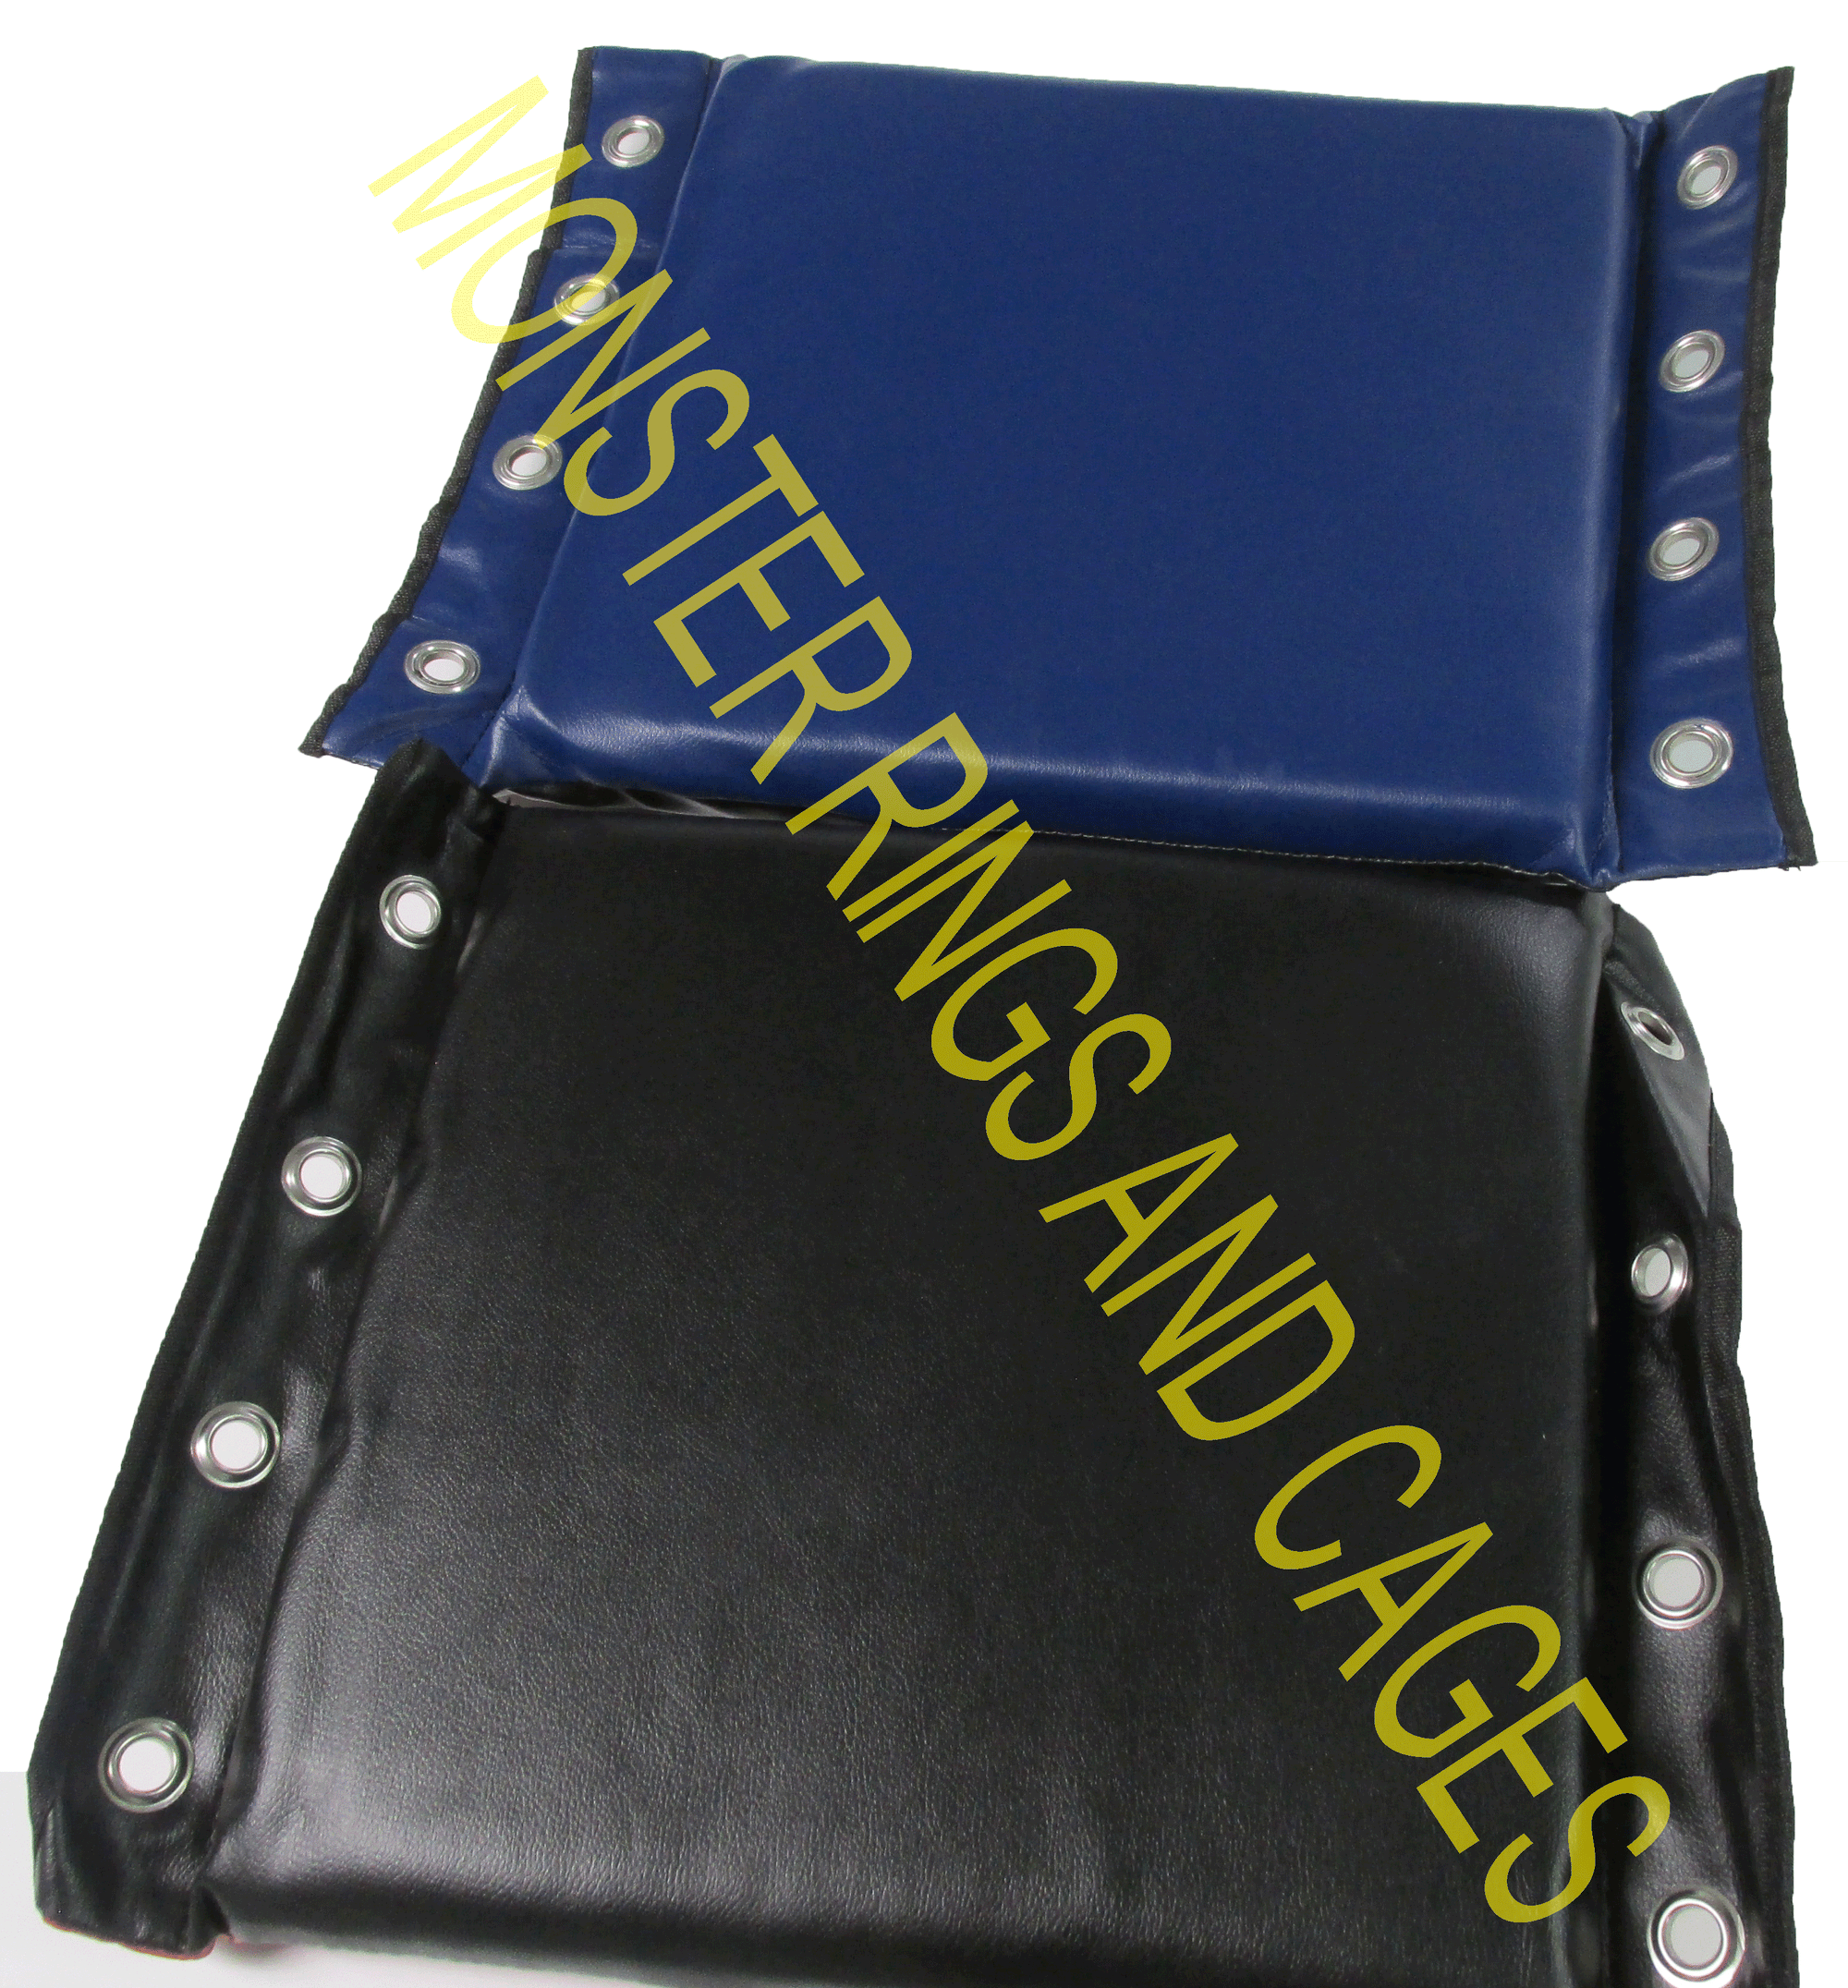 Dual colored wrestling turnbuckle pads are available from Monster Rings and Cages